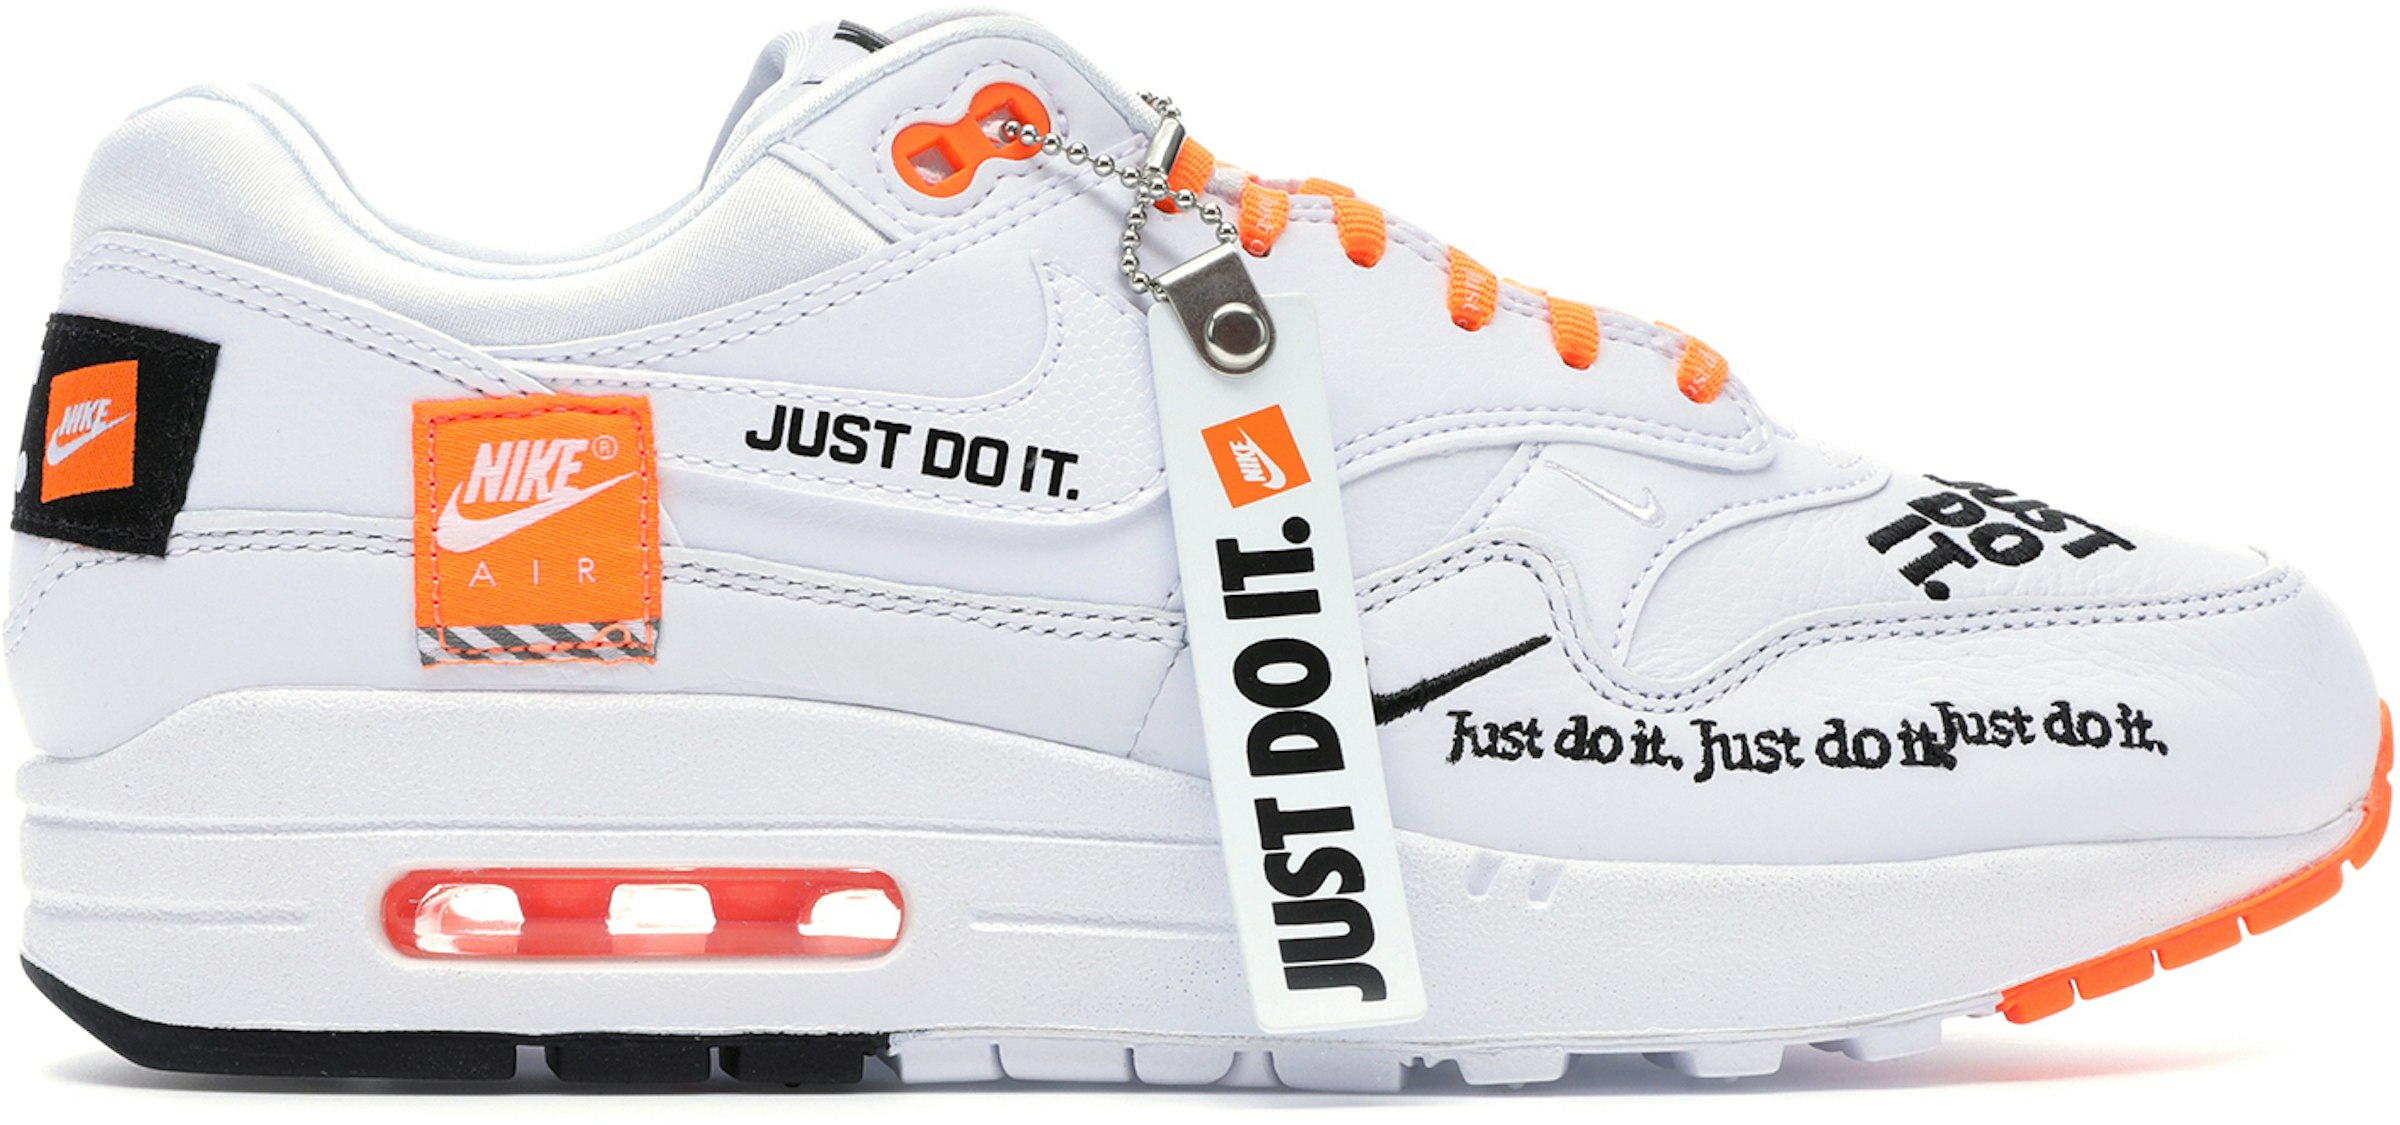 Nike Air Max 1 Just Do It White (Women's) - 917691-100 -